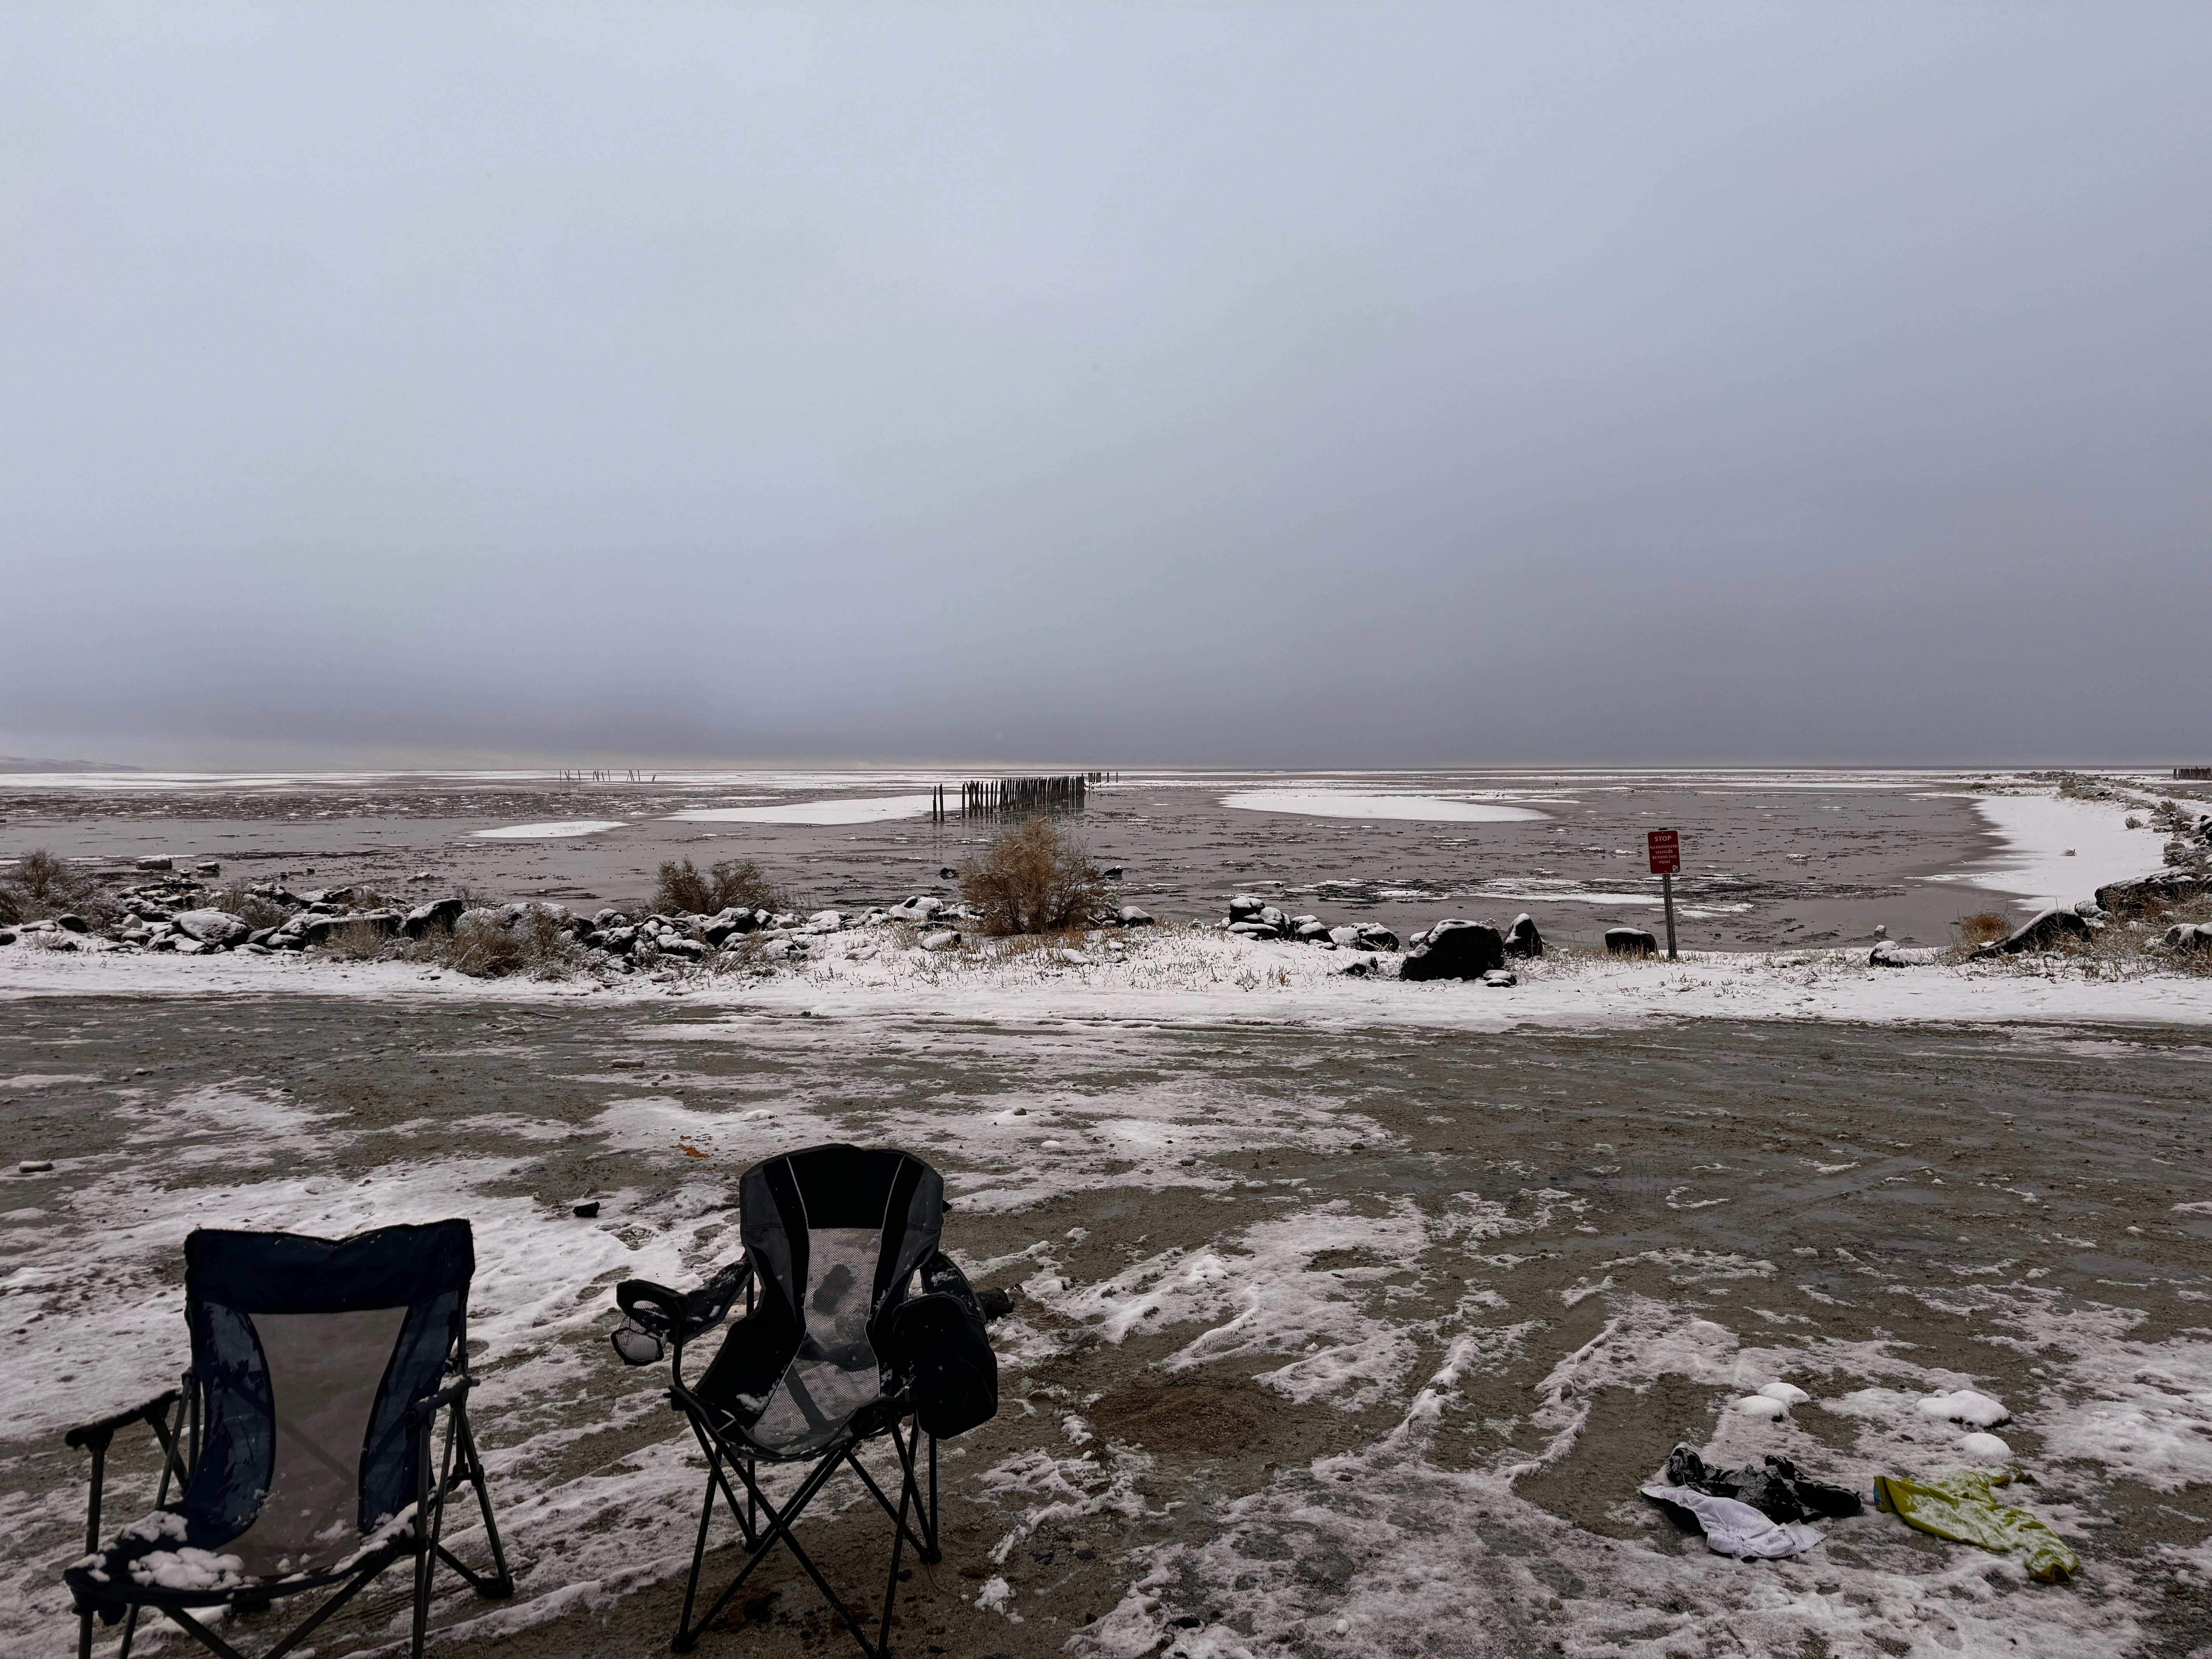 Camper submitted image from Spiral Jetty - 3